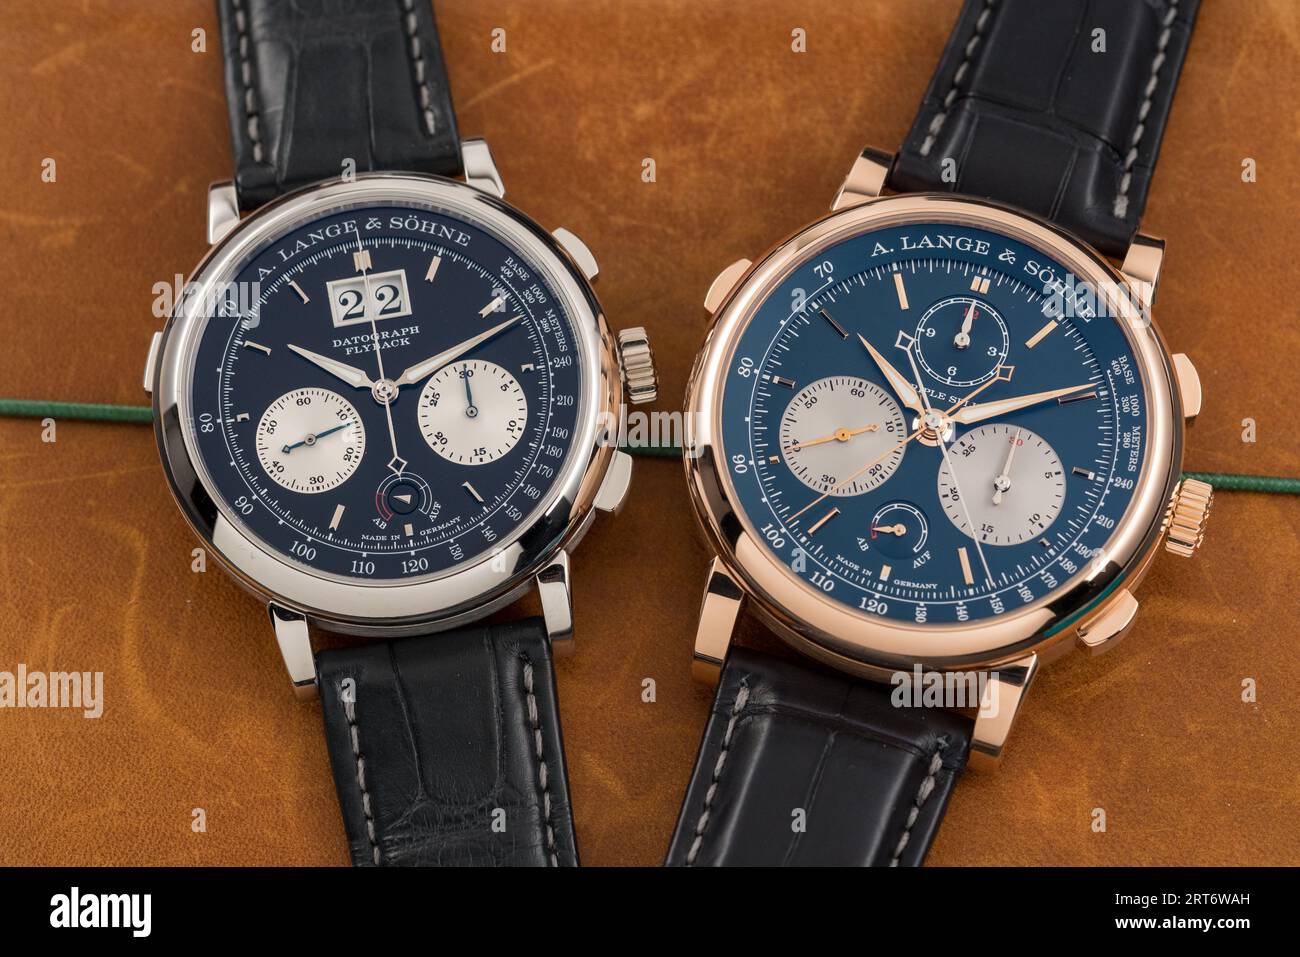 A. Lange & Söhne Datograph UpDown Stock Photo